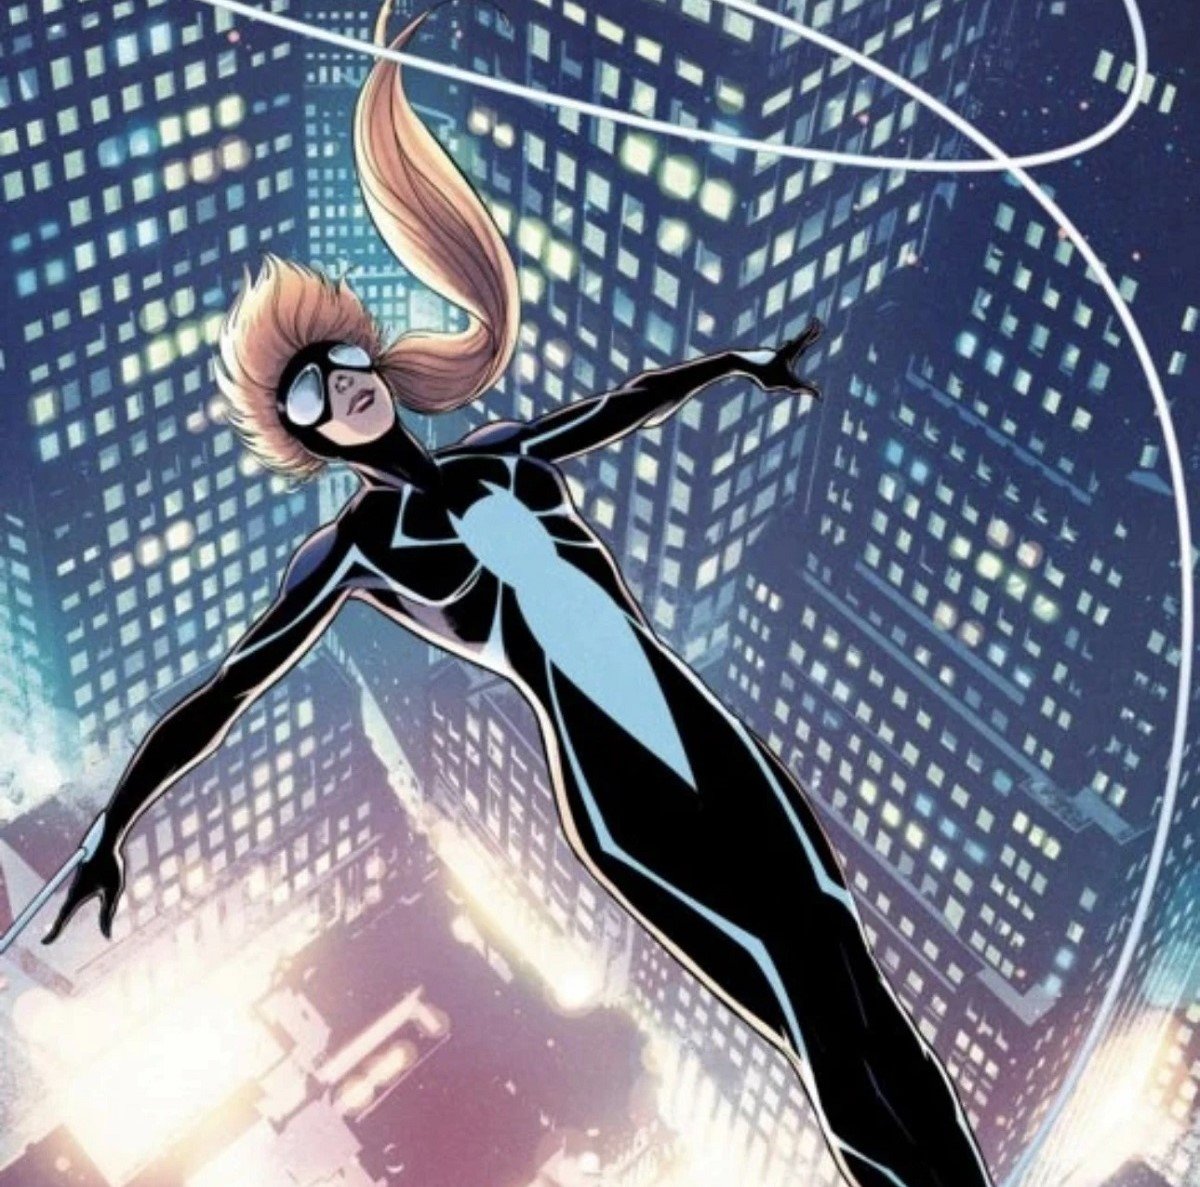 Cover illustration of Anya Corazon as Spider-Girl. She's dressed in a black-and -white spider suit with a mask over her eyes that leaves the bottom of her face open. Her long light brown hair is in a ponytail. She has thrown herself backwards off a building and is calmly gliding toward the grown as a web swirls around her. 